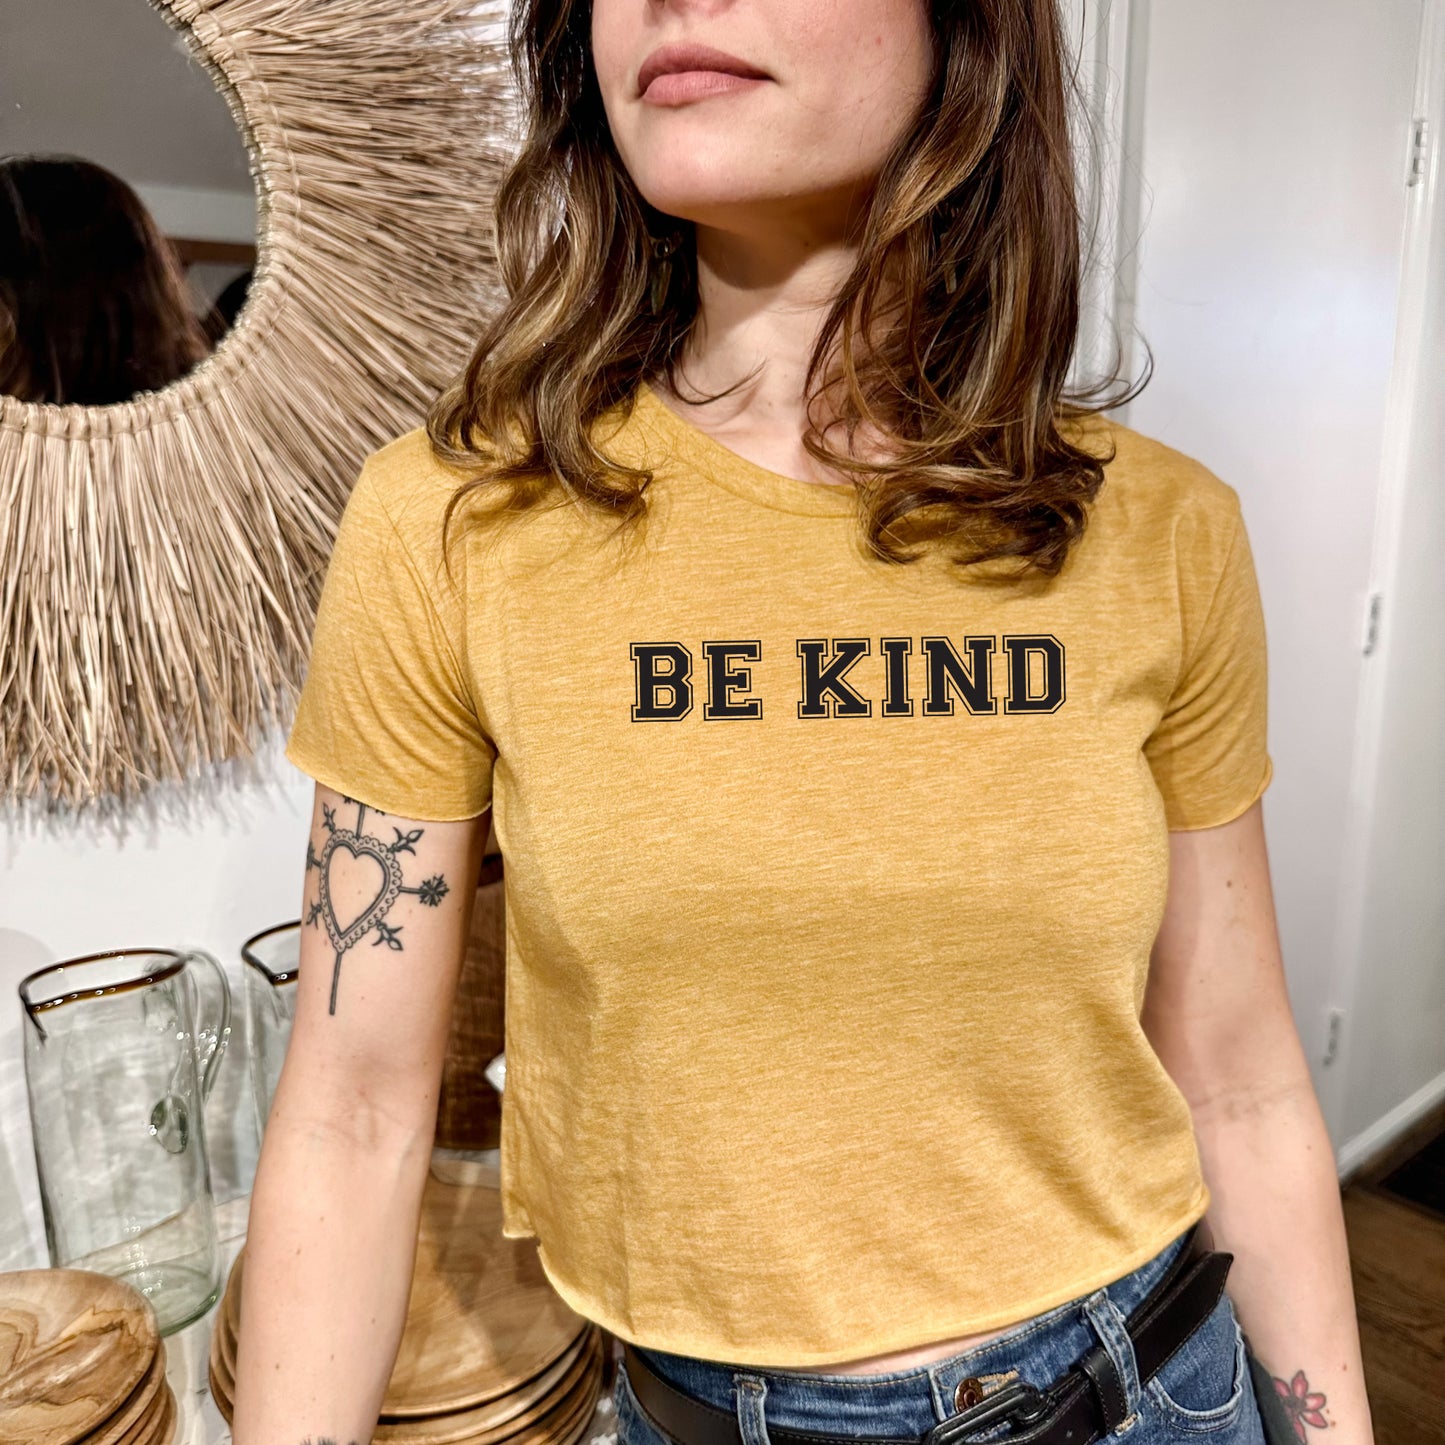 Be Kind - Feel Good Collection - Women's Crop Tee - Heather Gray or Gold